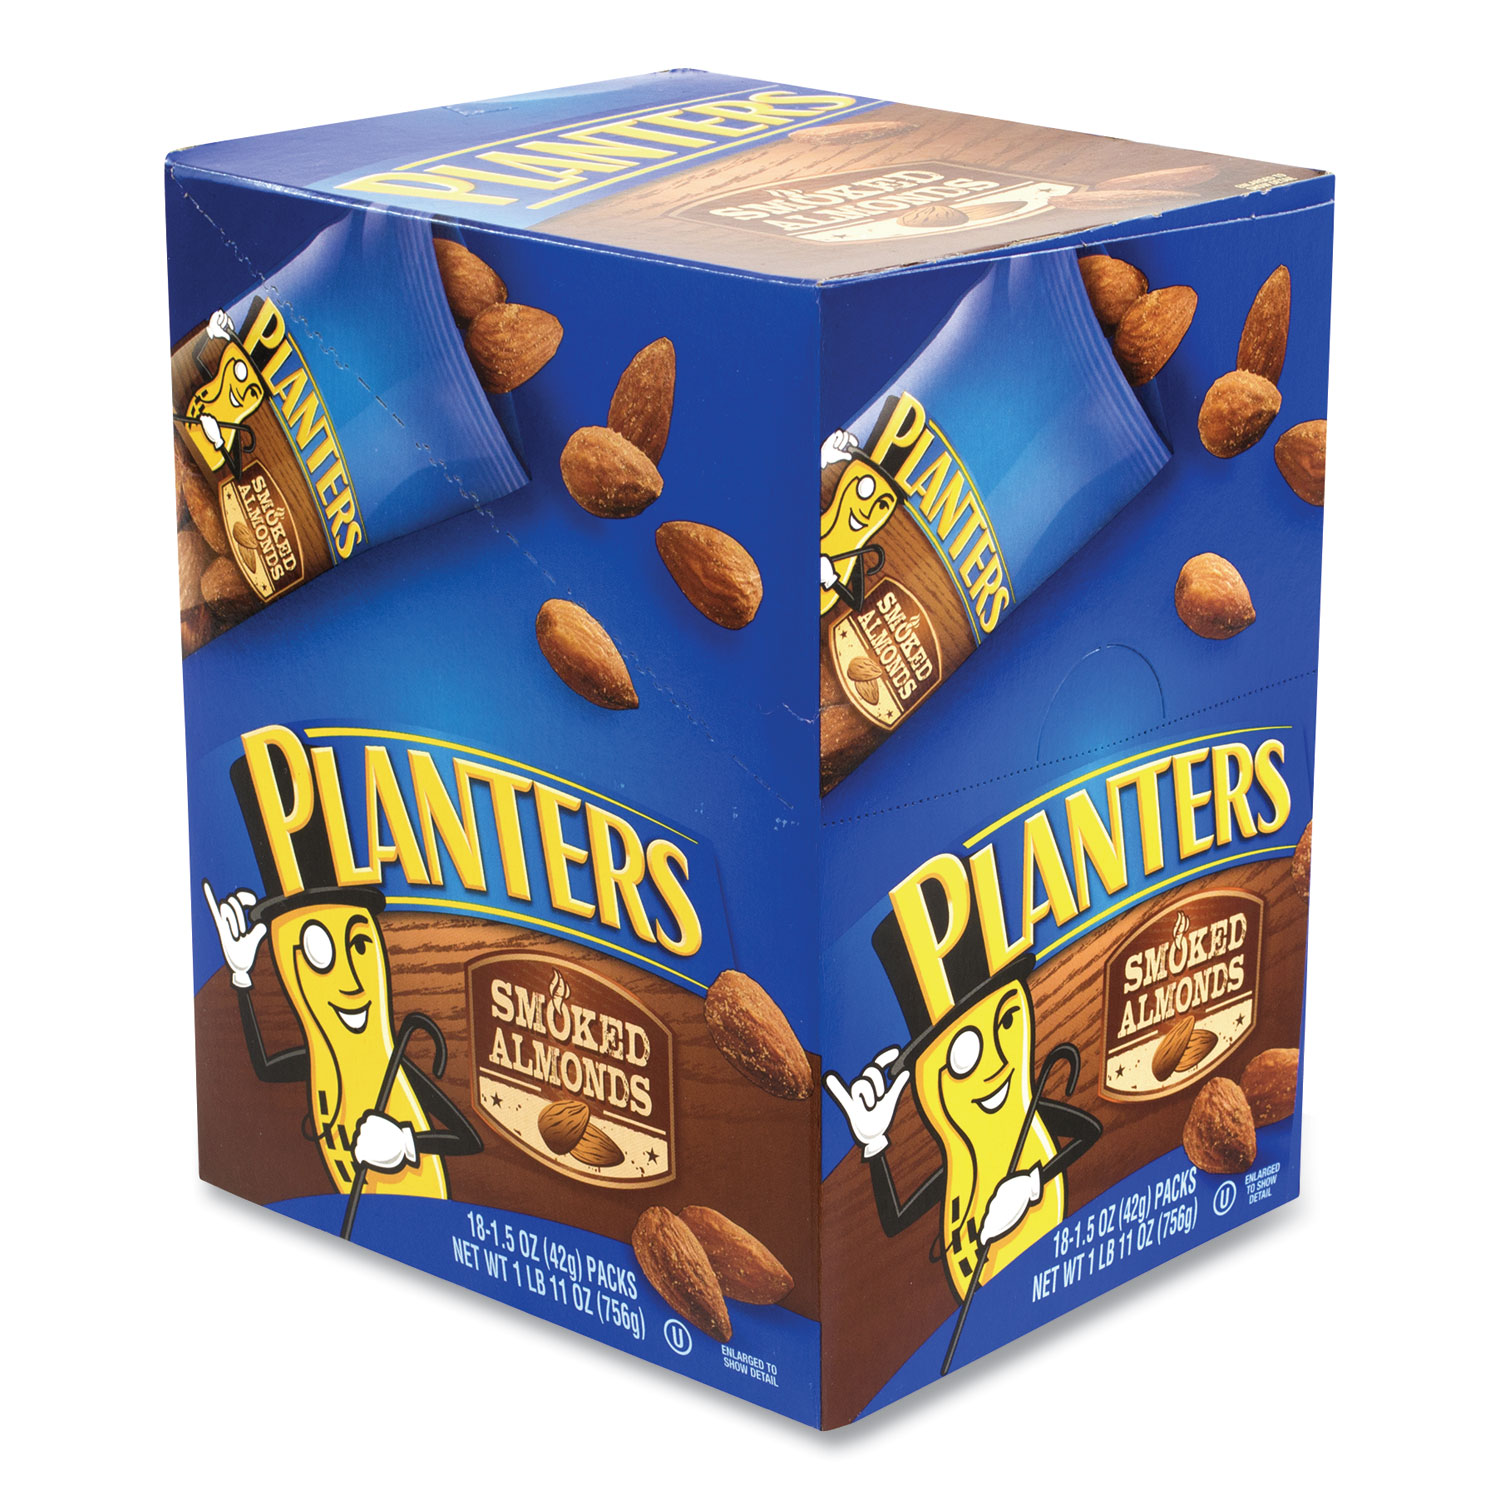  Planters 7237 Smoked Almonds, 1.5 oz Pack, 18 Packs/Box, Free Delivery in 1-4 Business Days (GRR20900628) 